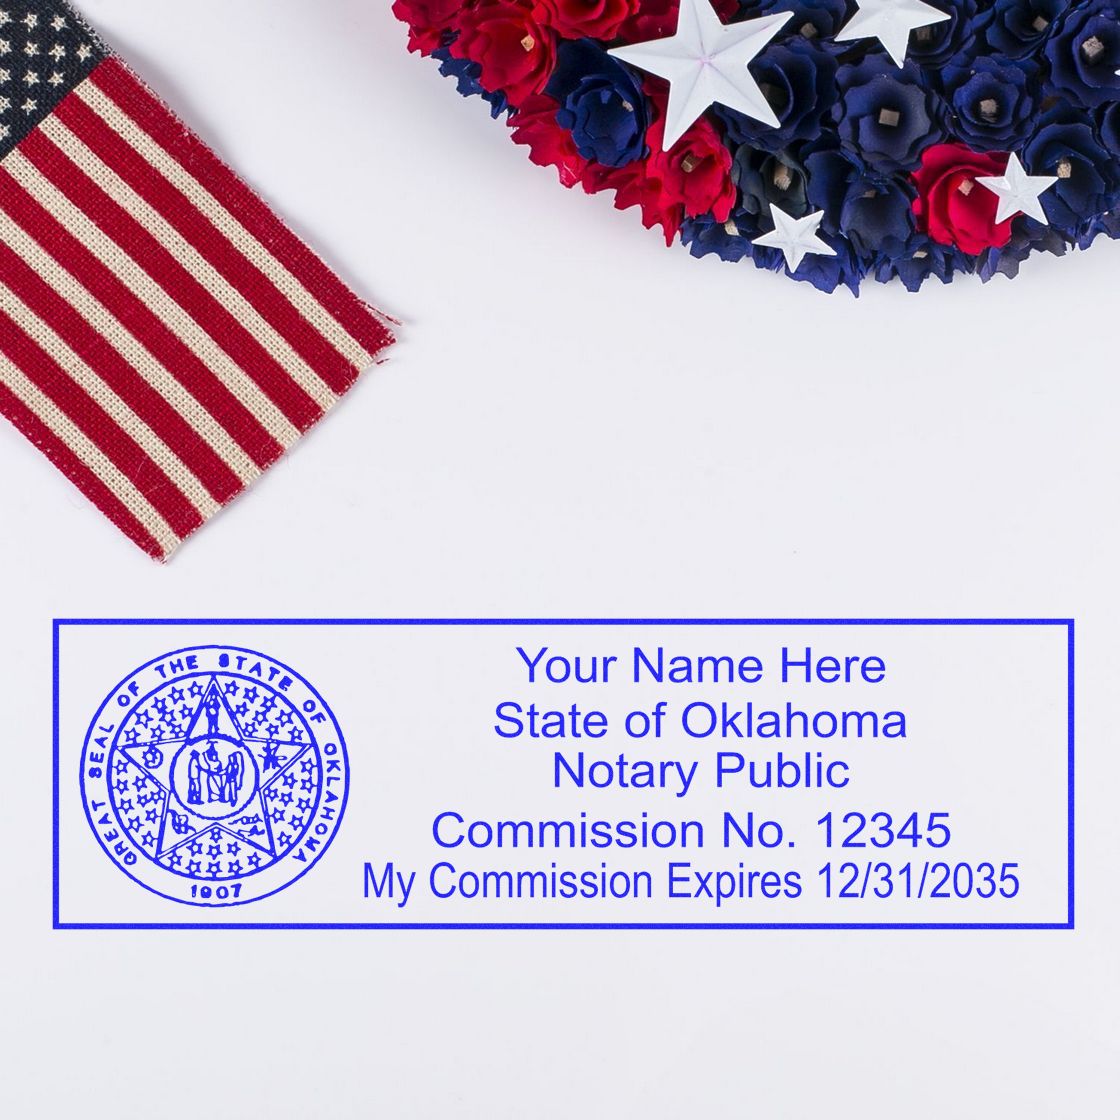 An alternative view of the PSI Oklahoma Notary Stamp stamped on a sheet of paper showing the image in use